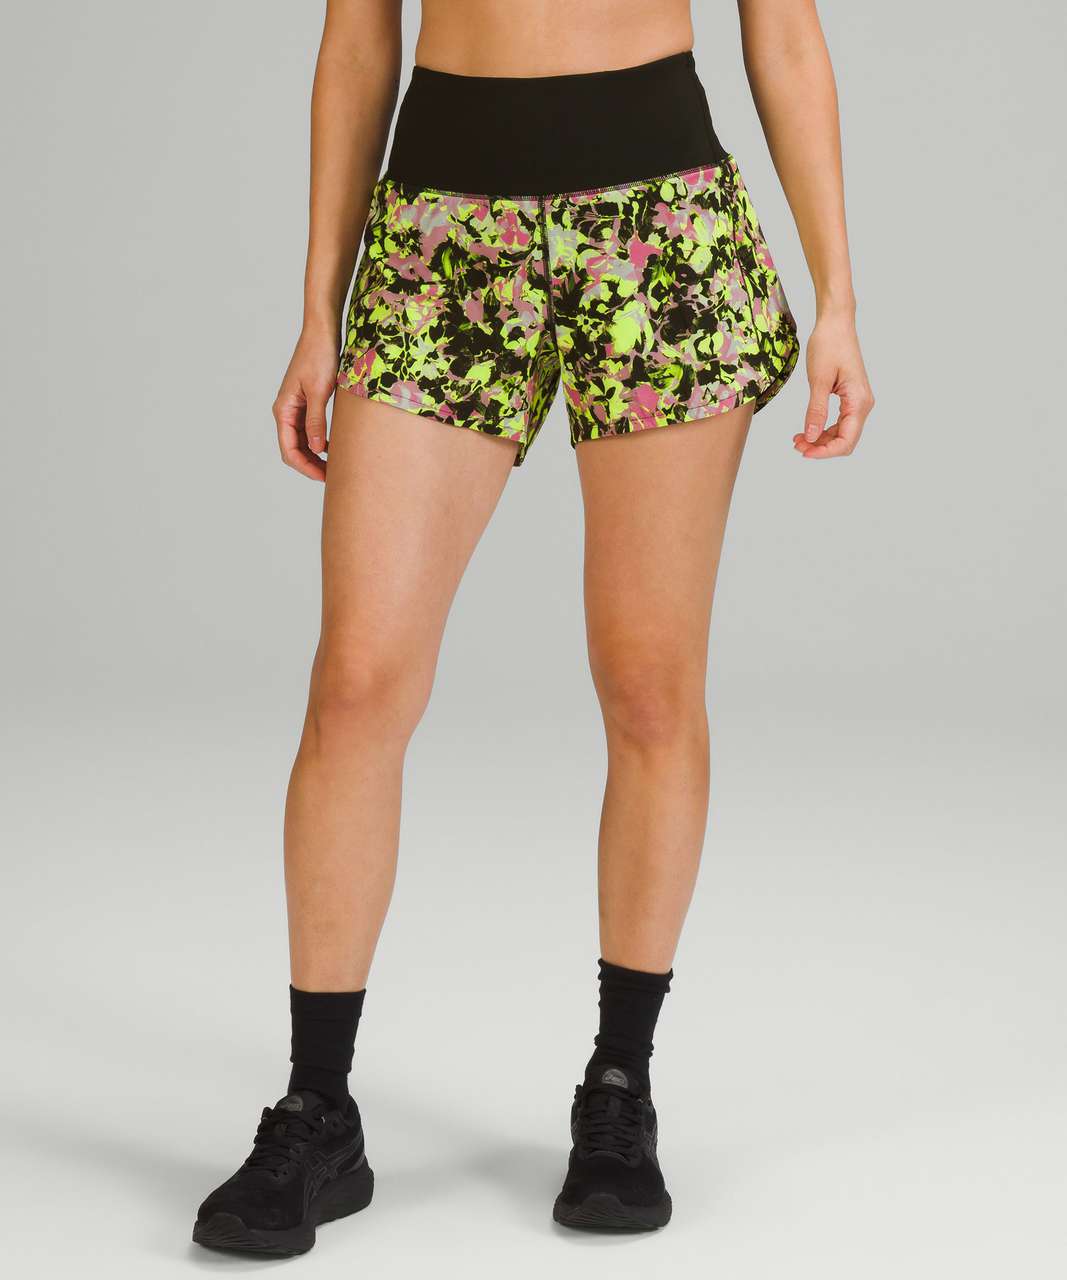 Lululemon Speed Up High-Rise Lined Short 4" - Inflected Highlight Yellow Multi / Black